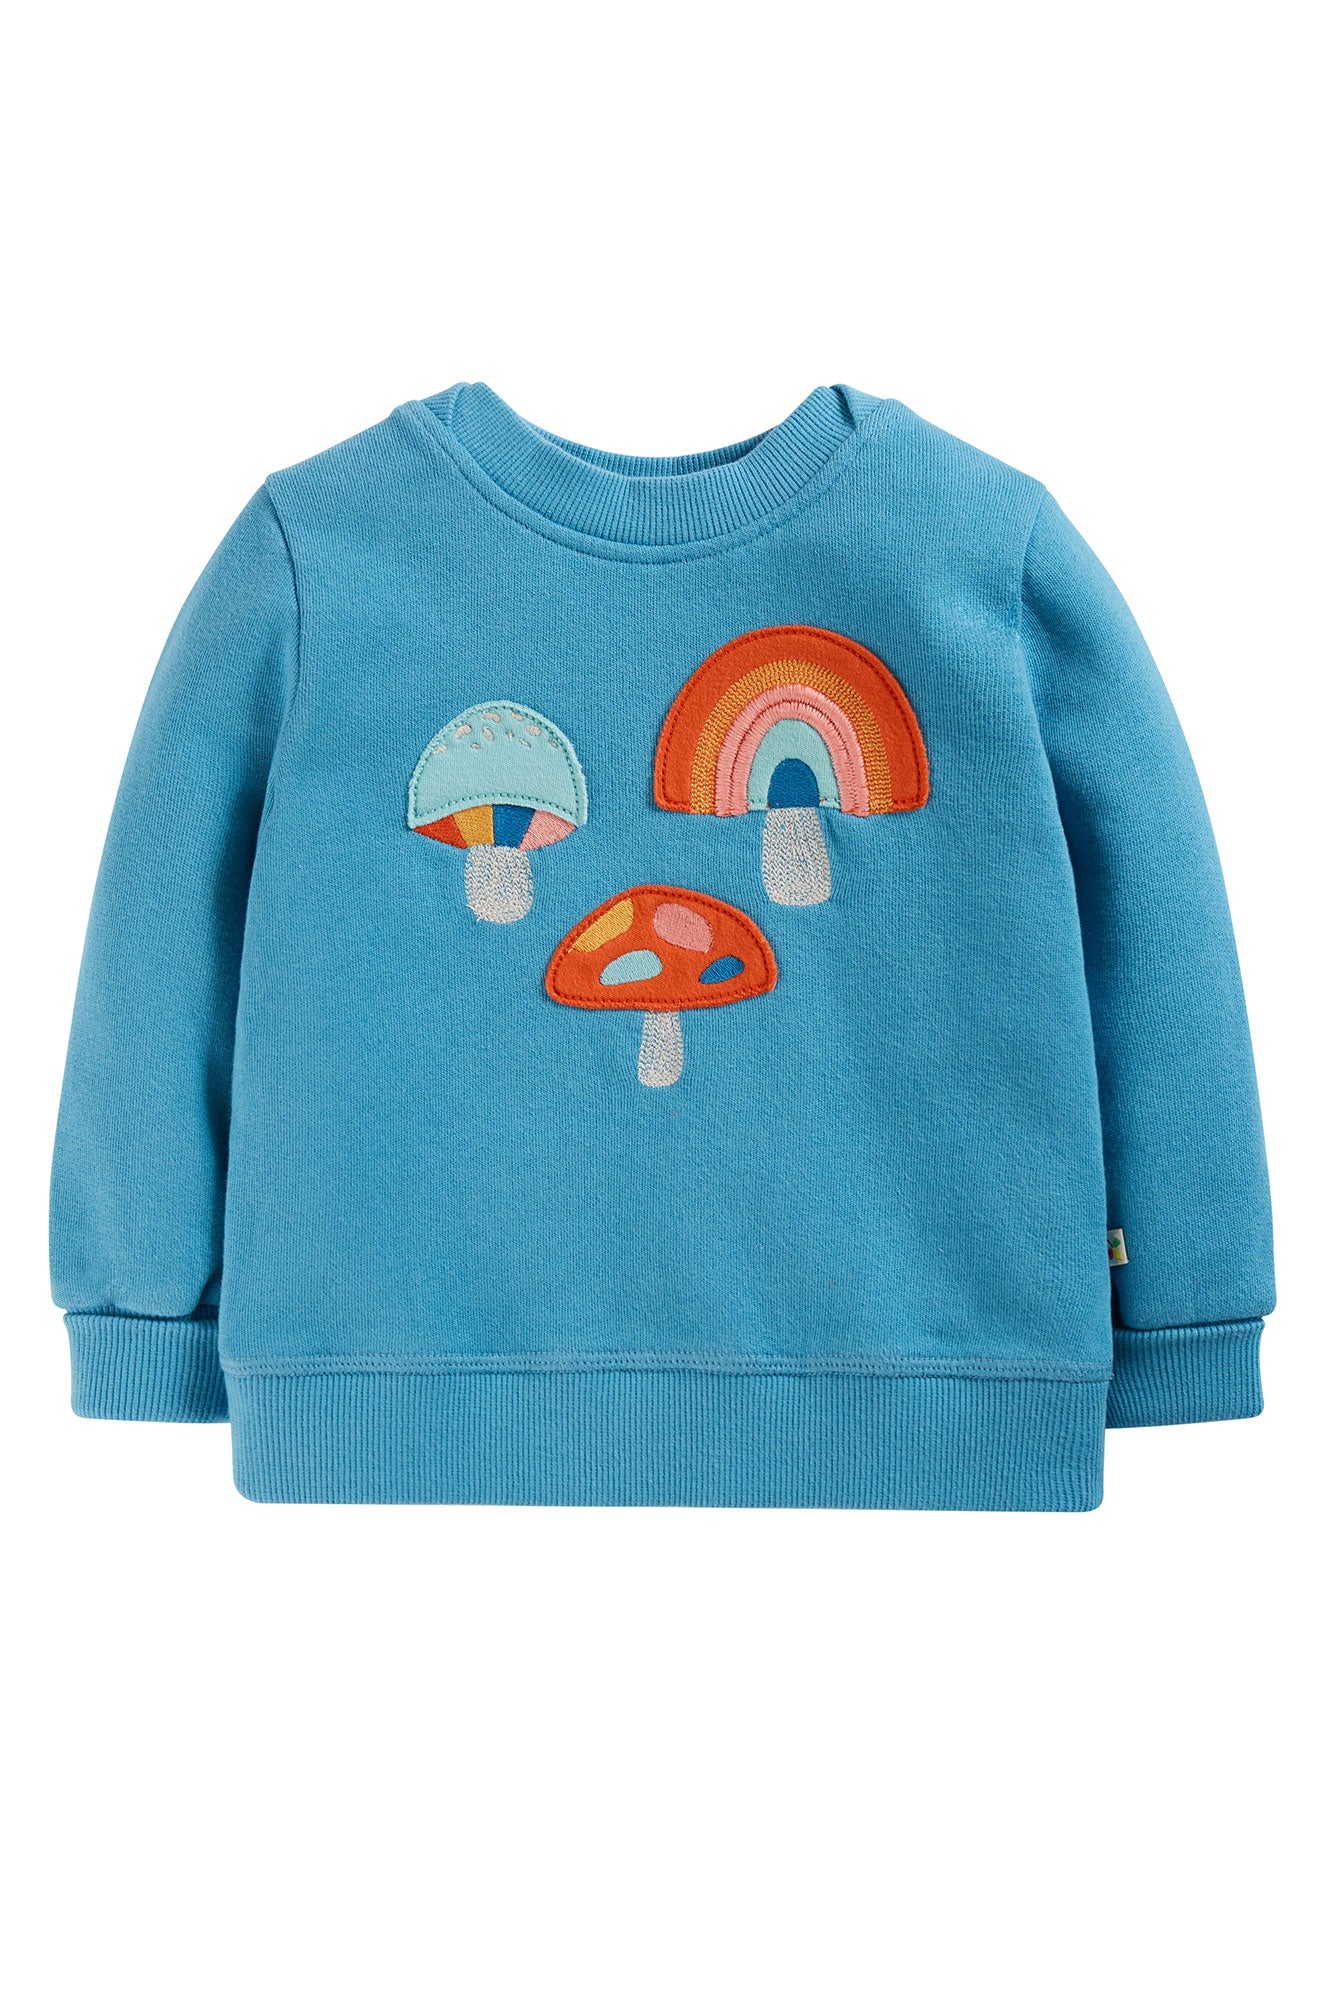 Tor Blue - Mushrooms | Switch Easy On Jumper | Long Sleeve Top | GOTS Organic Cotton